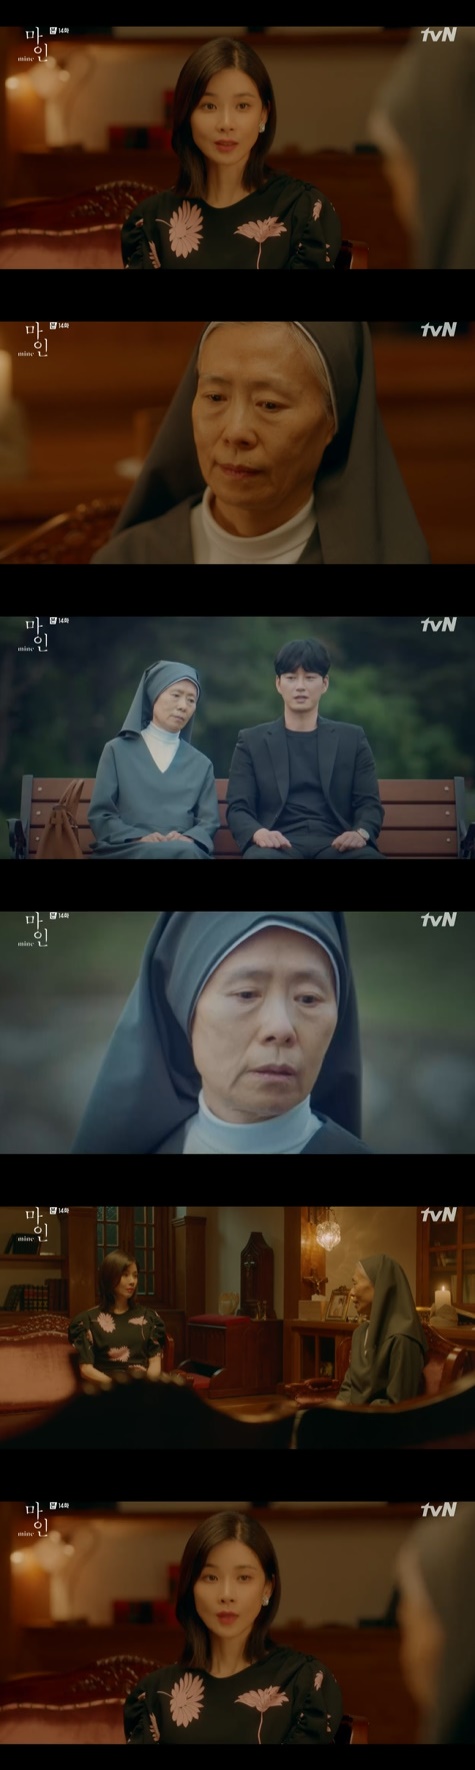 Lee Hyeonwuk dug up deathIn the TVN Saturday drama Mine, which aired on the 20th, Han Ji-yong (Lee Hyeonwuk) was shown to persistently dig into the death accident.On that day, Han met with Han (Chung Dong-hwan). Han told Han Ji-yong, I will be your real father from today. I will do what I have to do as an abby. Put it down. Put it down.If you do something wrong, you apologize and live as a new person. You can start again enough. You can wash it away. Han Ji-yong turned around saying, I can not do that. Han Ji-yong handed the money to Made and asked him to go to the hospital instead of me.Seo Hee-soo called Sister Emma to the place where Kwak Soo-changs brother is hiding, and explained everything Han Ji-yong did, and then said, Han Ji-yong is looking for this person.I will let you know this place and let Han Ji-yong be punished. I will leave everything to the nun. Since then, Sister Emma has visited Han Ji-yong and kneeled down and shed tears. Ji-yong, you have done something you should not do.Why did you do that? Han Ji-yong asked, I have achieved everything that God took away with my strength. There is nothing in this world. Do not pray for me anymore.Instead, please stop Seo Hee-soo. Please stop Seo Hee-soo, who makes me fall. But when Sister Emma did not answer, she was buried. Sister Emma tried to change her mind again, saying, The Lord loves you.Han Ji-yong replied, Well, tell God, abandon me.Meanwhile, Han Jin-ho (Park Hyeok-kwon) was informed that he had caught the real criminal who killed Kwak Soo-chang and said, Han Ji-yong did it.Cho Bum-gu, who was caught in the murder of Kwak Soo-chang, admitted his sins because he offered a sum that Han Ji-yong ignored on condition that he was quiet.Han Jin-ho said at the police station, Cho Bum-gu would have received a lot of money. There was a cannon phone, but I could not find it.I started to feel extremely anxious. A few days before I died. I felt like I had some big weakness. Seo Hee-soo, who lost Memory, said at a family meal, Do not you think Ha Joon should send her and Ha Joon back to the United States? Lee Hye-jin, who Ha Joon gave birth to, is her mother.Ha Joon is dead. Im not involved. Theres no reason for him to be here. I have to leave this house soon.Then one chairman replied: Here you grow Ha Joon - let the tutor go.But Seo Hee-soo said, It is right for my mother to raise it. Jeong Seohyun said, Memory will come back soon. Hang in a little.So Seo Hee-soo said, Im afraid Memory will come back. What did you see?As Detective said, someone might have killed Ha Joon, Father. Seo Hee-soo came across the image of Ha Joon (Jung Hyun-joon) who was in a hurry, saying, It is sadder that my mother can not remember me than her mother leaves me.Seo Hee-soo then visited Sister Emma (Jesus Jeong); Seo Hee-soo said, It took me a whole day to read the text I shared with the nun; the last text I shared with the nun met with Ha Joon Father.Tell me everything honestly. He did not answer this letter. Please answer that now.Sister Emma said, Every time Ji Yong thought, I was sick. I looked at her birth and growth from afar.But if Ji Yong had known that there was no place to mind in the house, he said, telling Han Ji-yong that he was abused and hurt.Seo Hee-soo said, The nun is sorry for him? And Sister Emma replied, I feel sorry for her soul.Seo Hee-soo said, I said you saw me at the scene. Why did not you report it?Sister Emma said, In fact, I doubted Seo Hee-soo. But she said that she was missing Memory.I thought that there was someone else at that time, and maybe Mr. Hee-soo could be a victim. Seo Hee-soo said, Do you believe me? Detective found out that while proceeding with Susa, Seo Hee-soo made perfect memory loss Acting in Memory Night.He demanded a hospital record investigation and suspected, Maybe I am doing Seo Hee-soo Acting now.At that time, Seohyun suggested to Seo Hee-soo to go to see art paintings, and Seo Hee-soo replied that he had an appointment with his friends.Im meeting people, she smiled.At that moment, a call came to Detective and Jung Seohyun looked at Seo Hee-soo, saying, These people are persistent. Detective told Jeong Seohyun, Is Seo Hee-soos memory really lost Memory?Who was next to him? He would have been hurt a lot. Please kick his arm. Jung Seohyun said, I was hurt while working. At that moment, Detective, who was investigating Seo Hee-soos medical records, called and said, It is Seo Hee-soo who was lying down with Han Ji-yong.I was seriously injured, he said.Detective informed him of this fact, and he looked calm. Detective said, It is a face that knew everything.Then Seo Hee-soo could lose his Memory Detective told Lee Hye-jin (Ok Ja-yeon): Who took Seo Hee-soo to the hospital? Who is Seo Hee-soos car when he entered the hospital?I am looking for who came with me in the nearby black box. Lee Hye-jin replied, I was in Boston with Ha Joon, and Detective was angry not to lie.However, Lee Hye-jin laughed and left the place saying, Look again.Later, Detective went to meet Ha Joon with Seo Hee-soo, and Seo Hee-soo saved Ha Joon, who almost got into an accident while crossing the crosswalk.I said that you are the one who can protect you, he said, raising his throat and Han Ha Joon was happy to say Mom to Seo Hee-soo.Detective watched from afar, and Detective found out that it was not Lee Hye-jin but Jung Seohyun who took Seo Hee-soo to the hospital on the day of the accident.broadcast screen capture